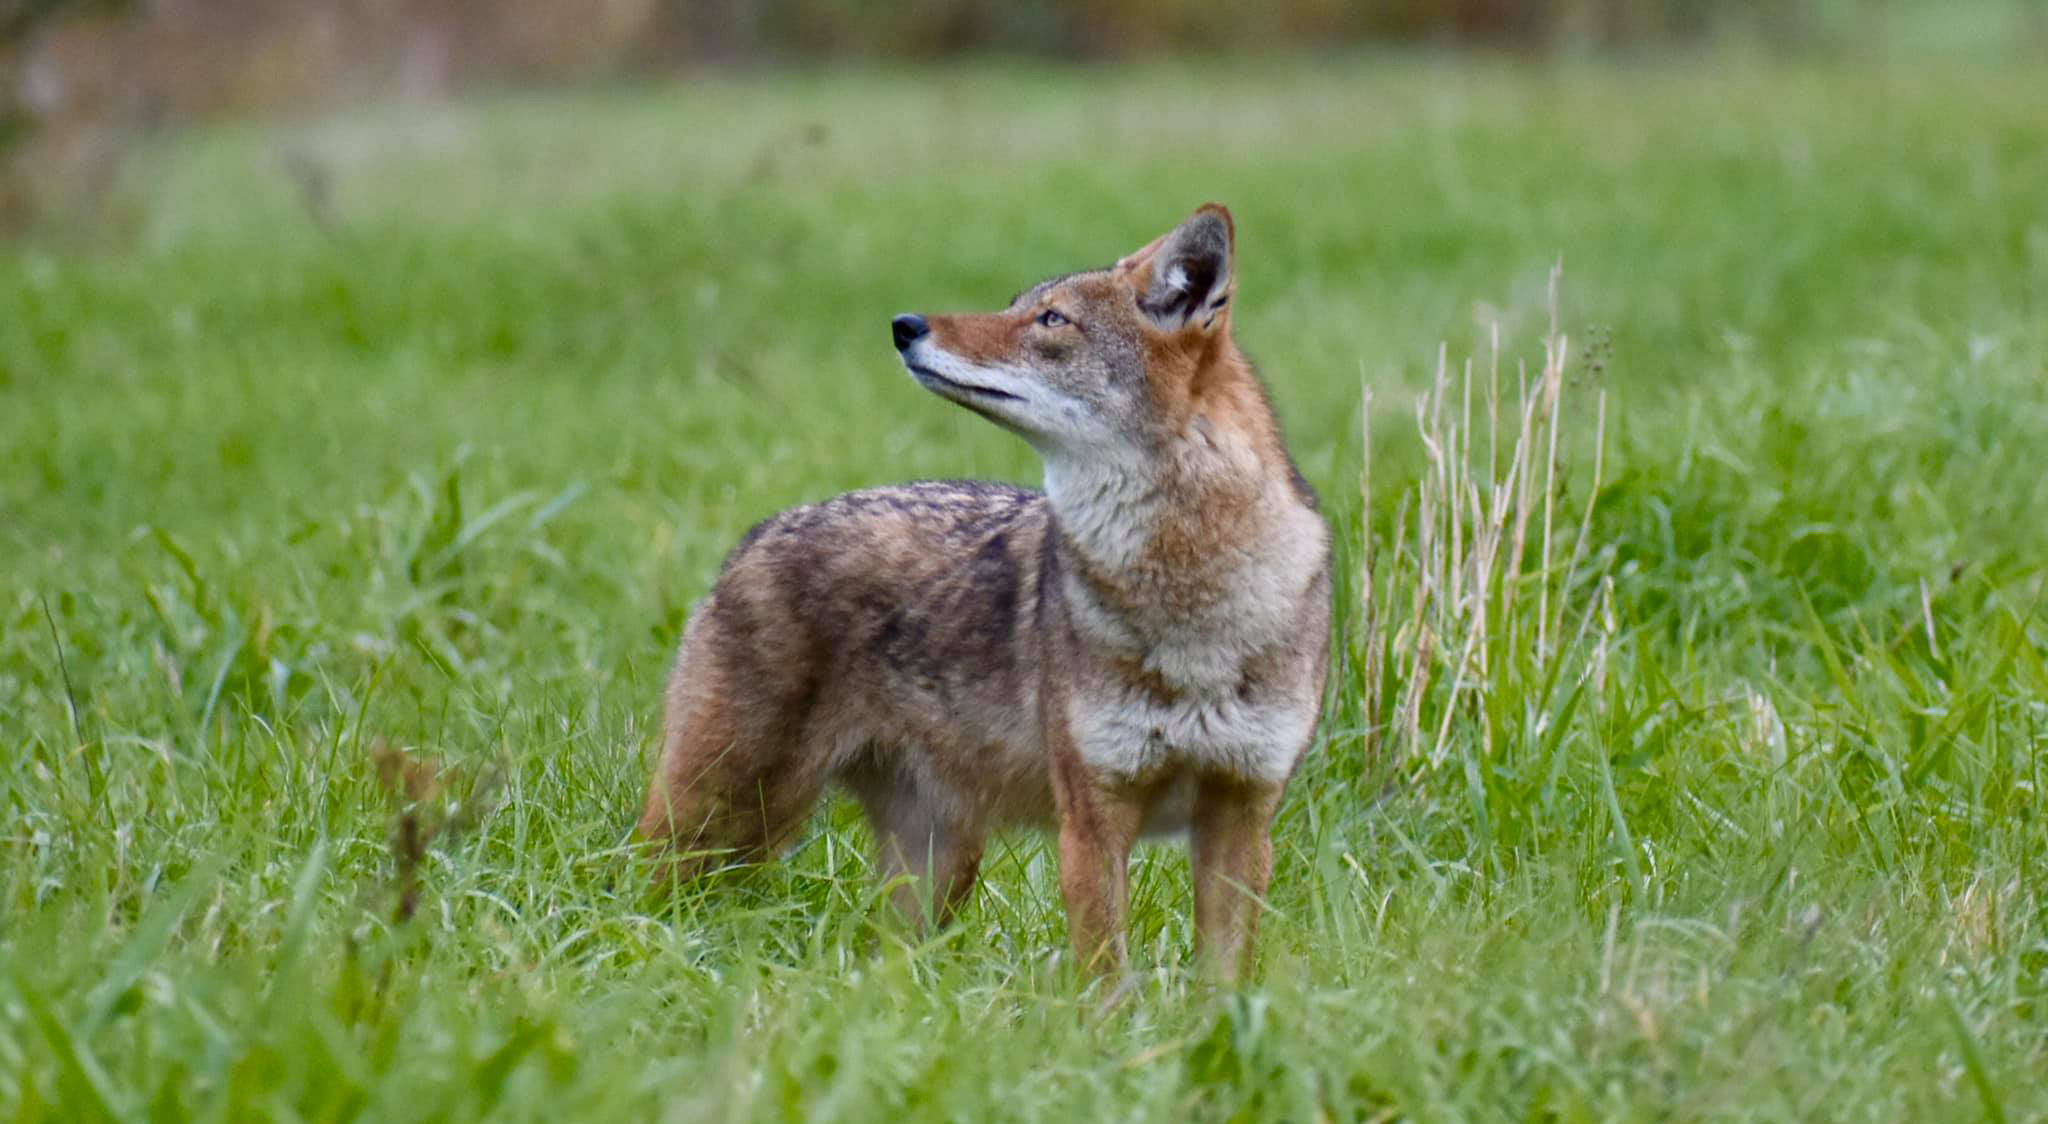 A coyote standing in a field looking off into the distance.